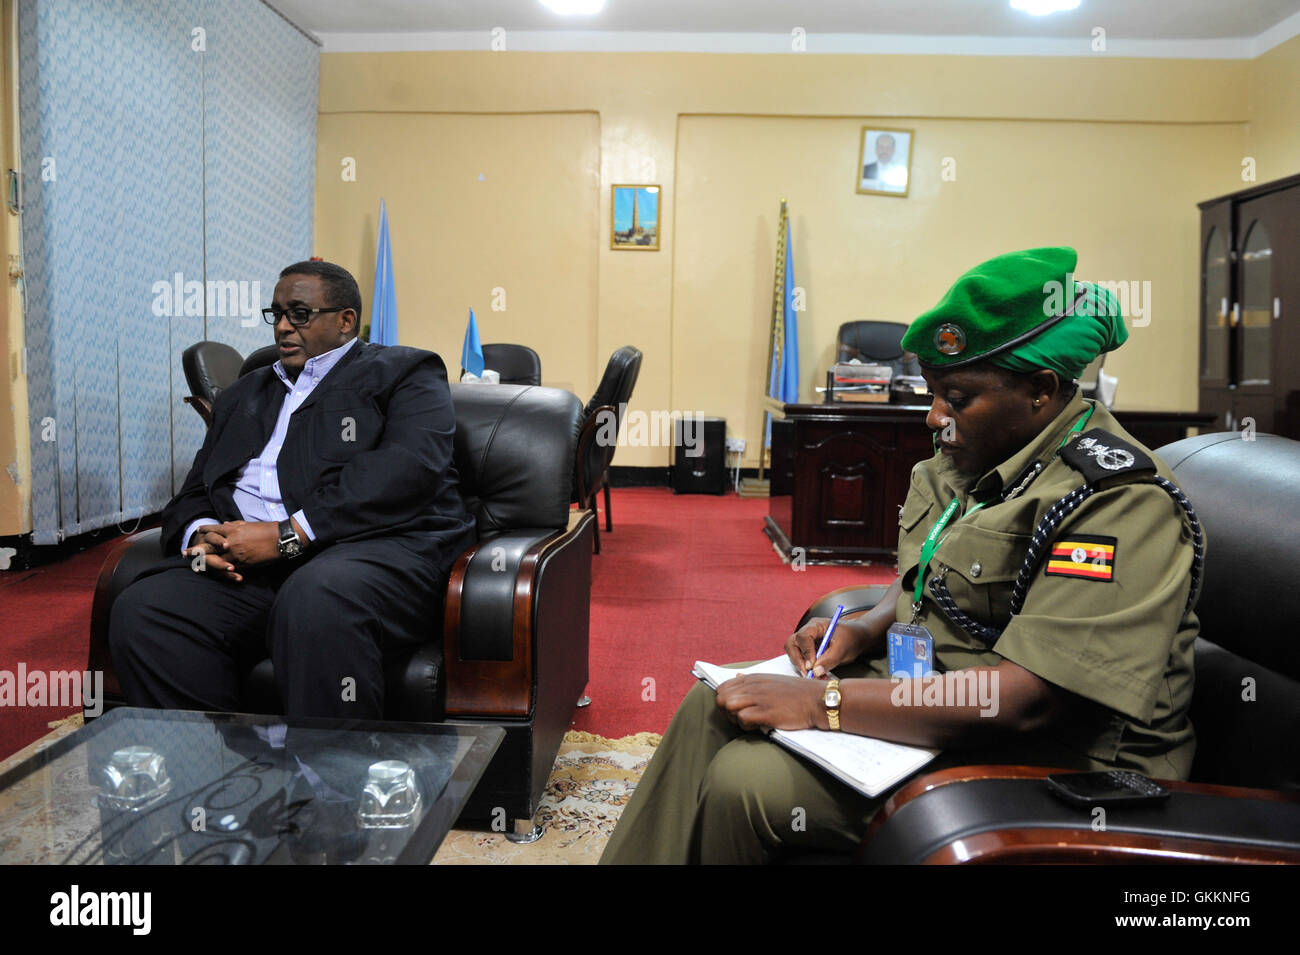 The Force Commander of the African Union Mission in Somalia (AMISOM), Lt. Gen. Jonathan Rono, and other senior officials from AMISOM meet with the Prime Minister of the Federal Government of Somalia, Omar Abdirashid Sharmarke, at his office in Mogadishu, Somalia, on October 31, 2015. AMISOM Photo/ Omar Abdisalan Stock Photo